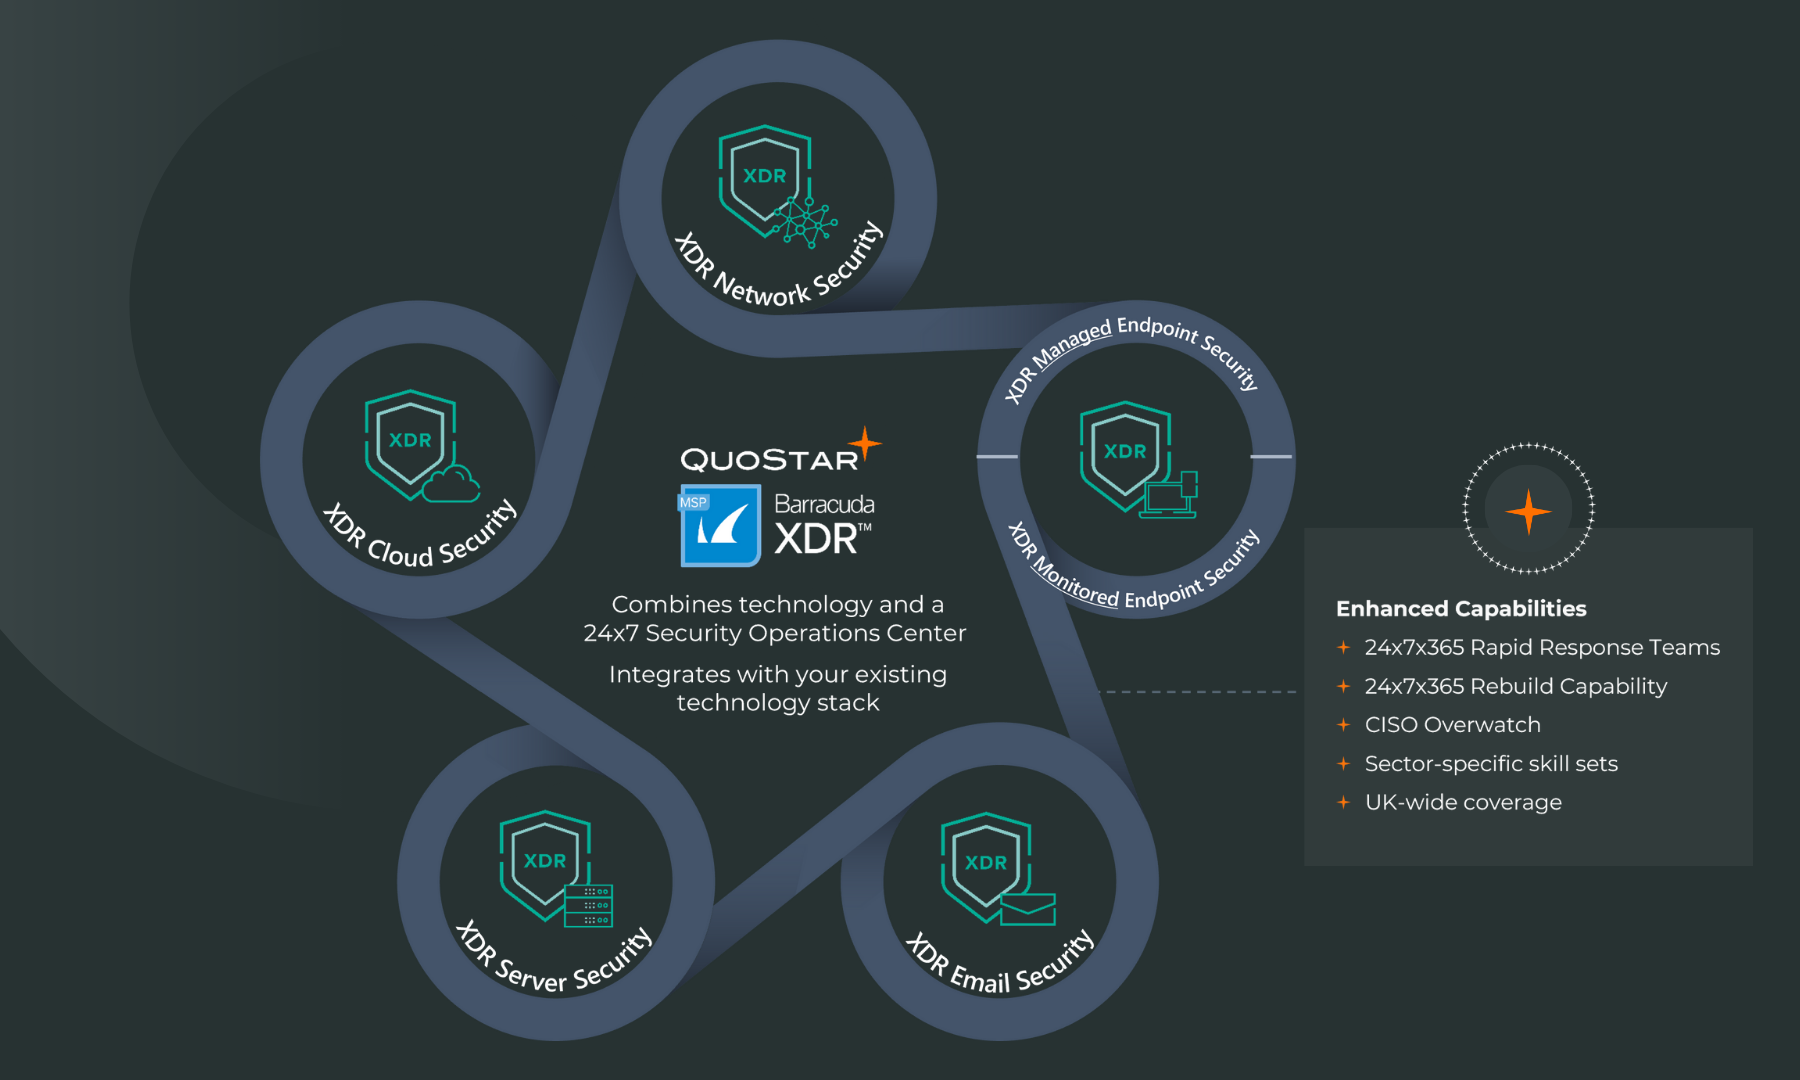 QuoStar Managed XDR, powered by Barracuda